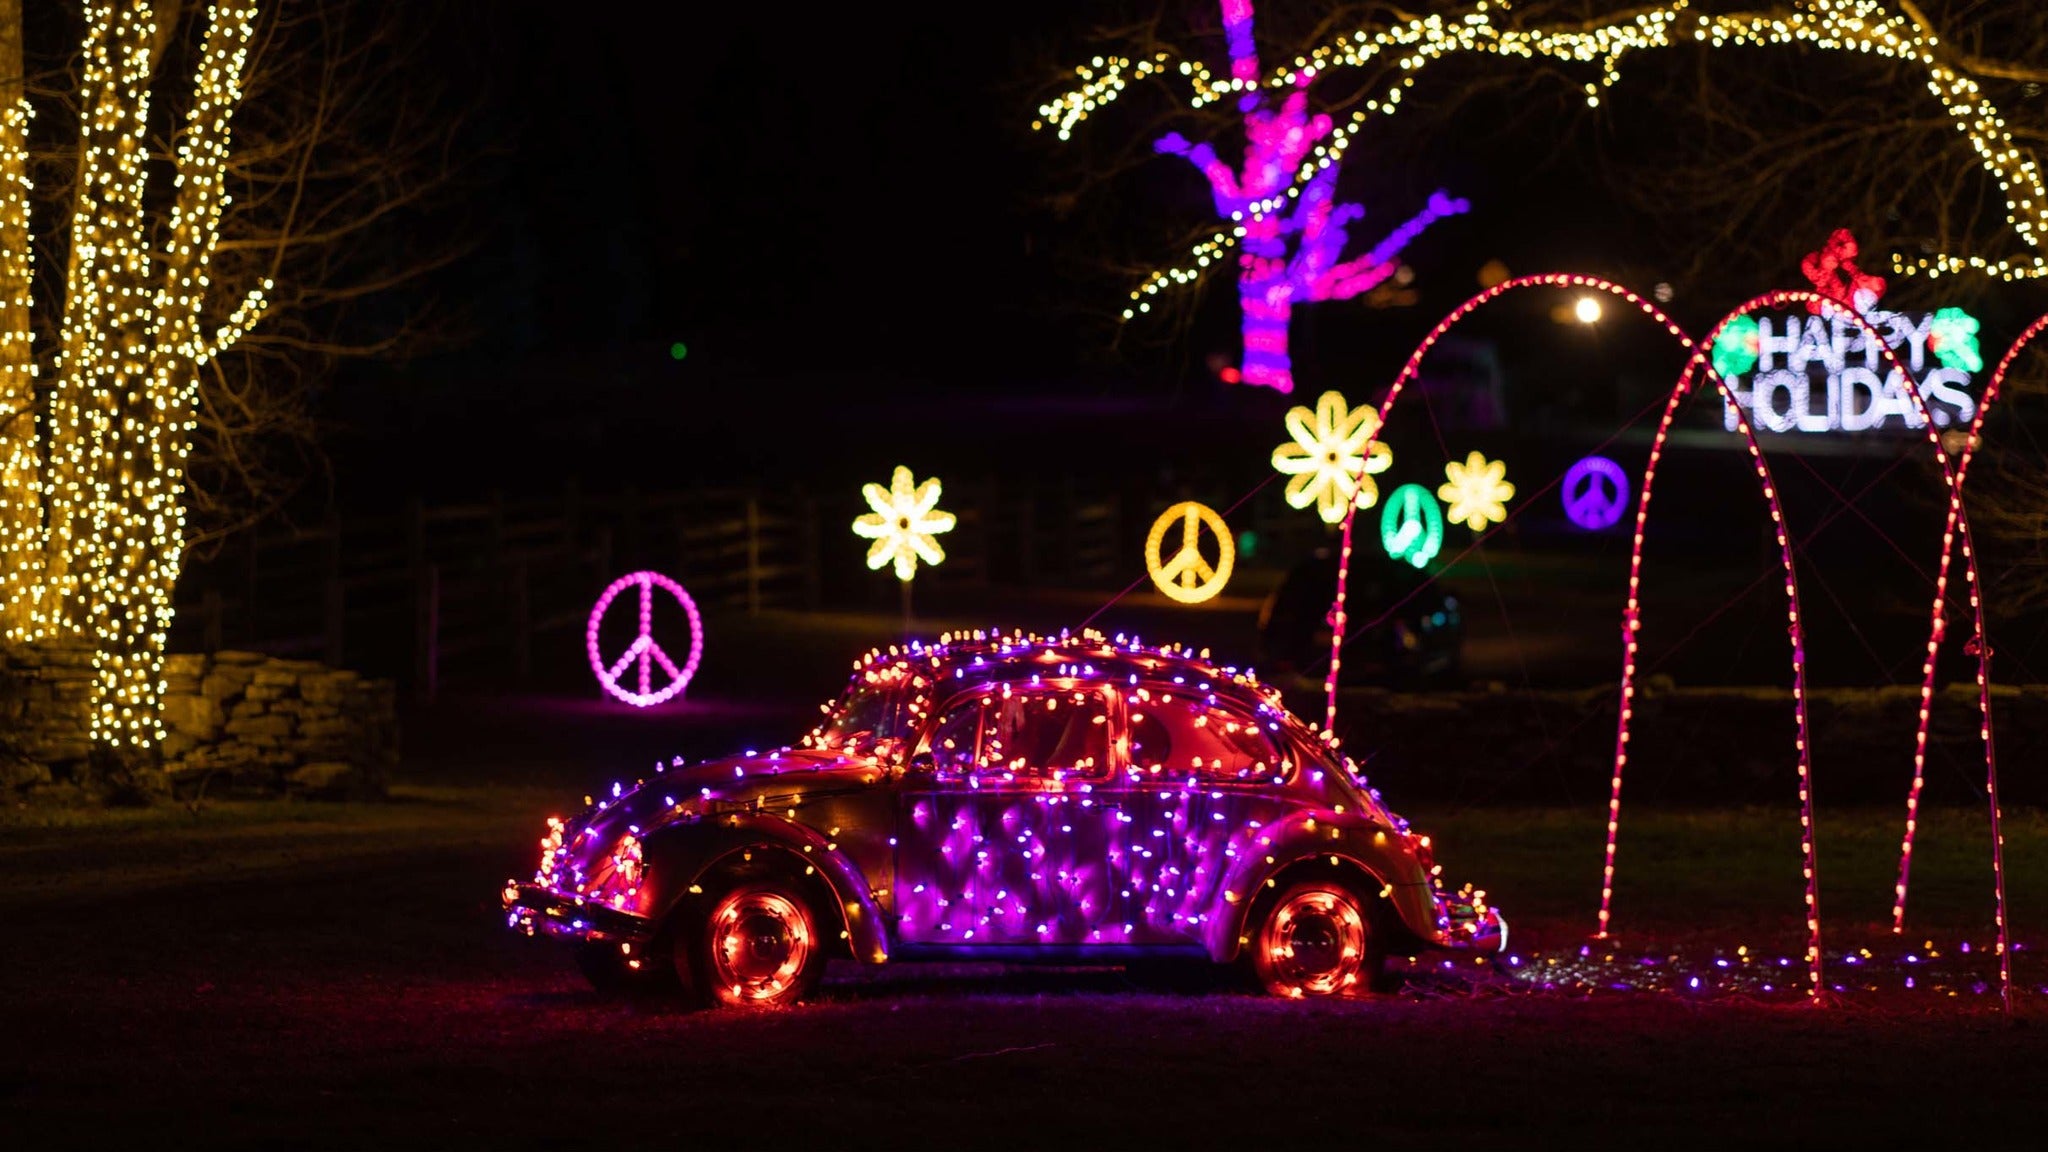 Peace, Love & Lights powered by Healey Brothers in Bethel promo photo for Day of Pricing presale offer code